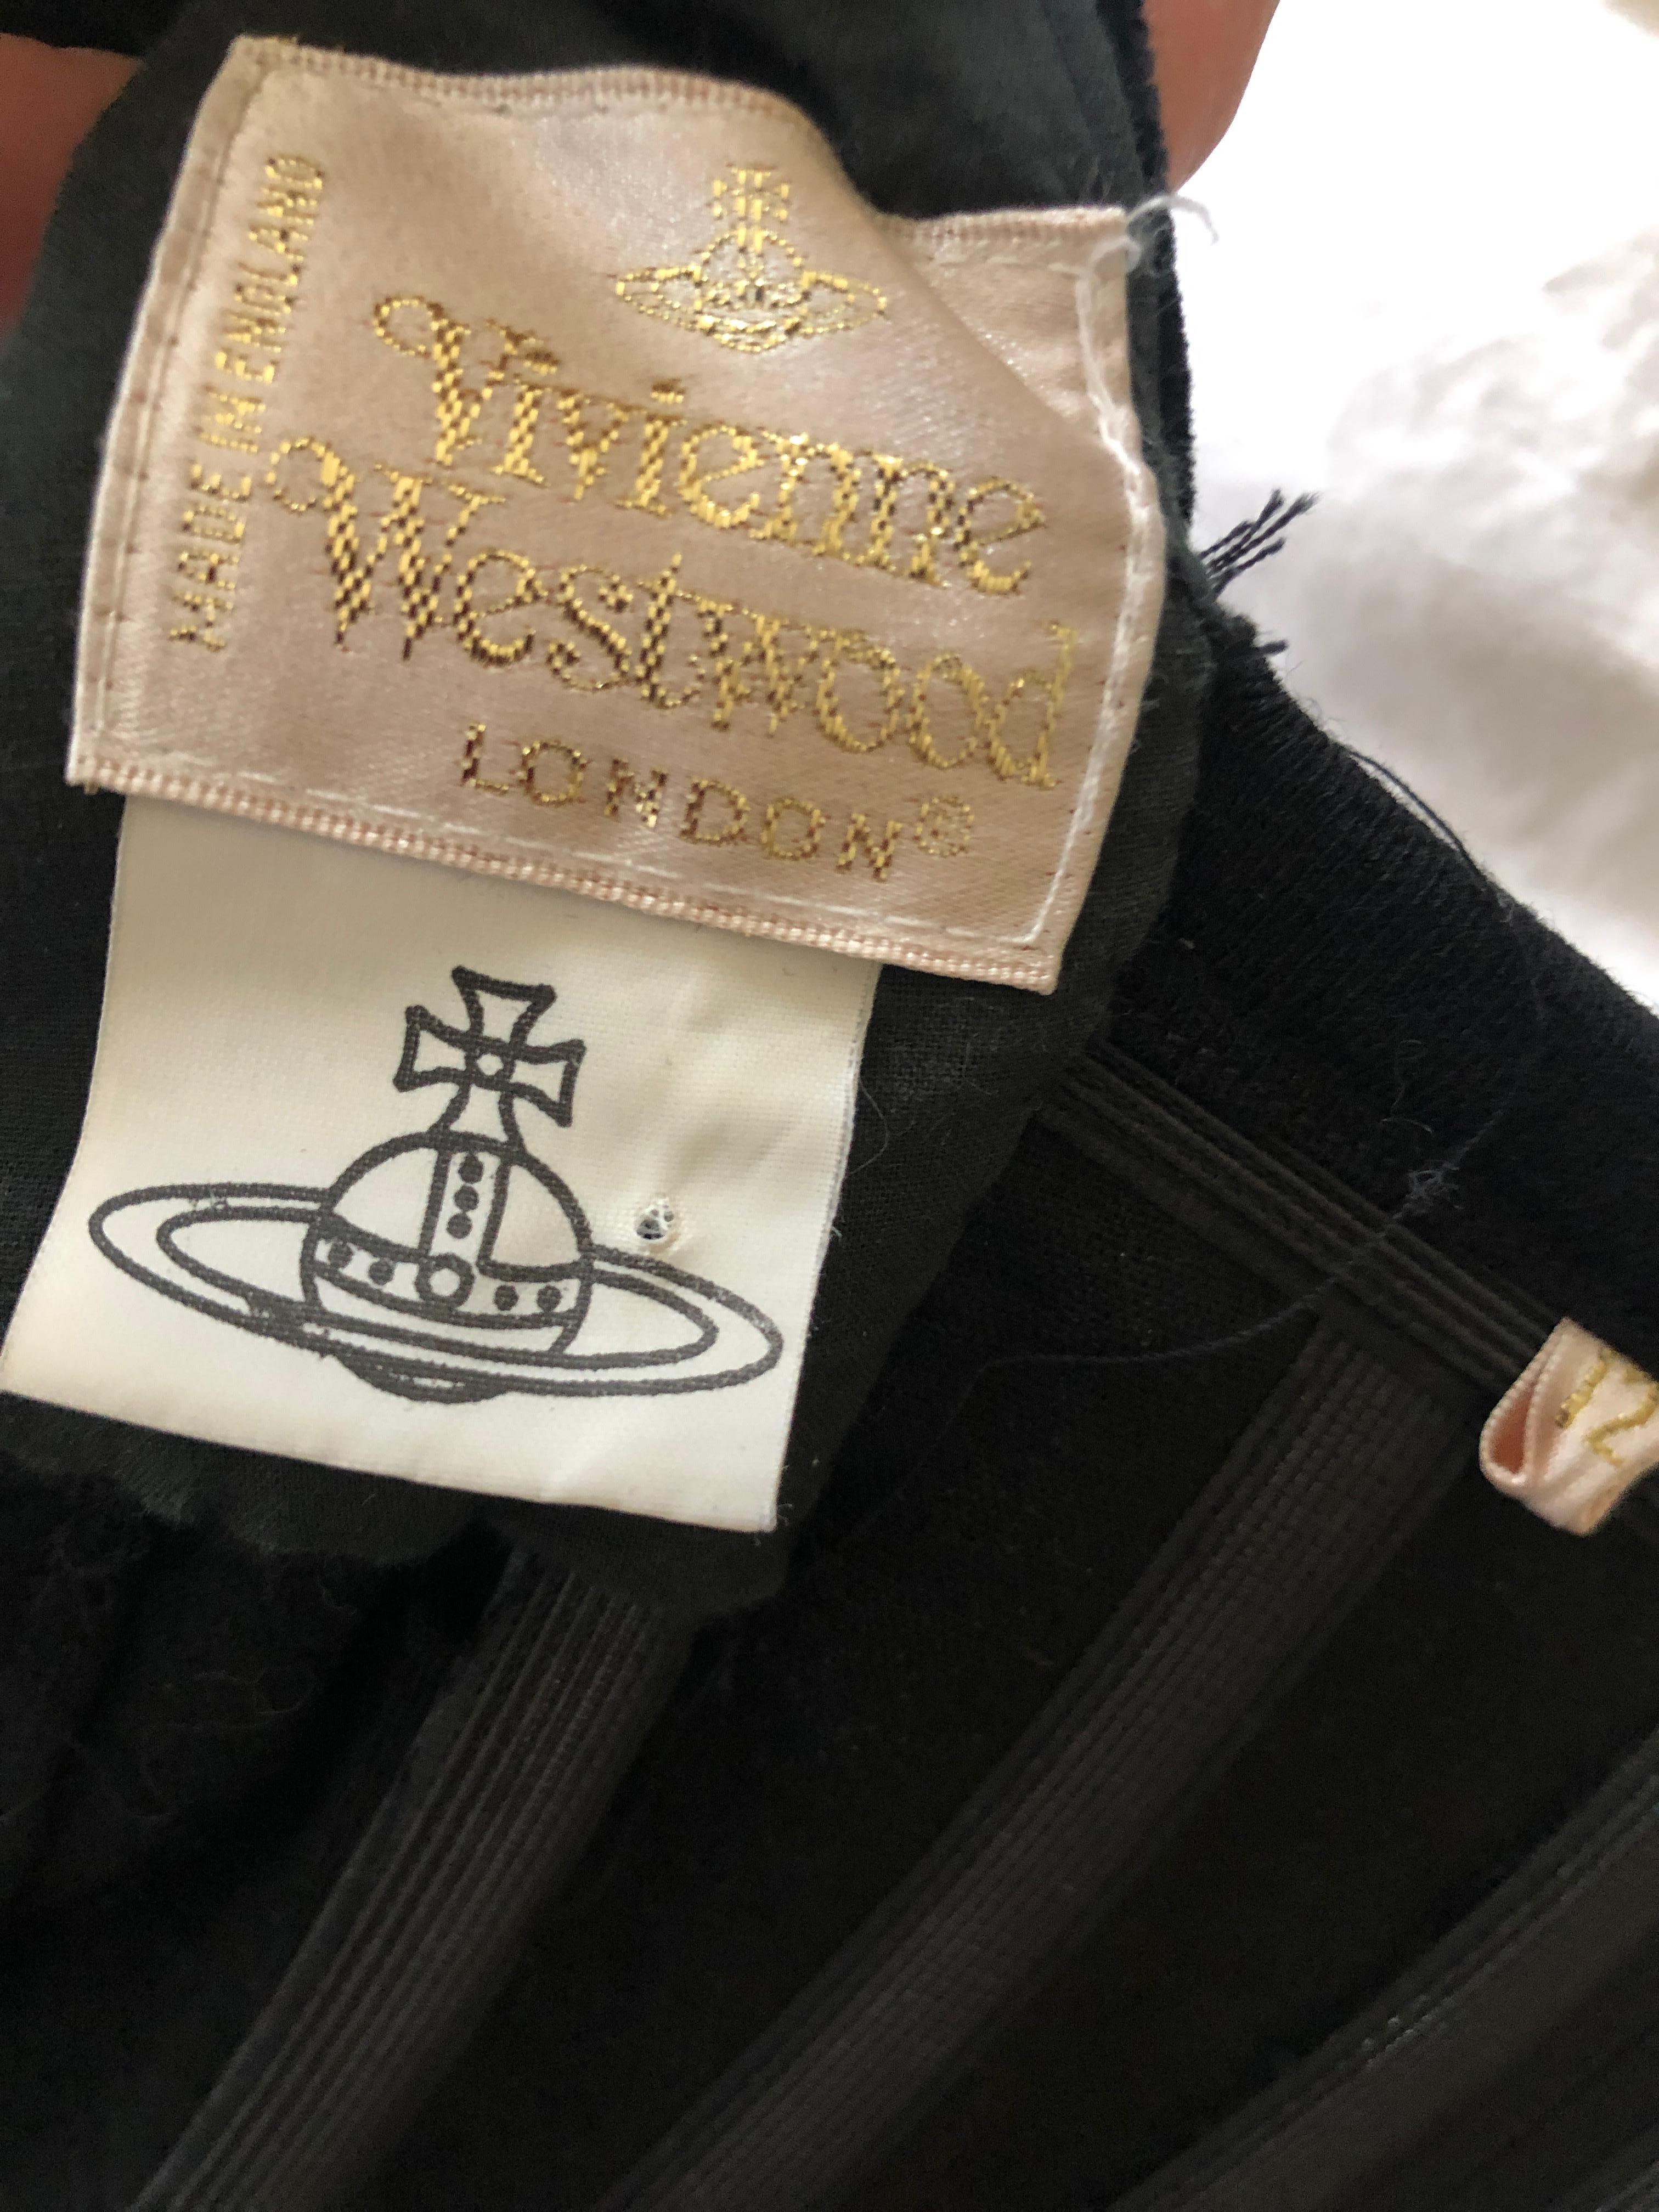 Vivienne Westwood Gold Label Vintage Velvet Trimmed Corset Top
Size 12 UK
There is a lot of stretch, fully boned, see interior photo
Bust 34